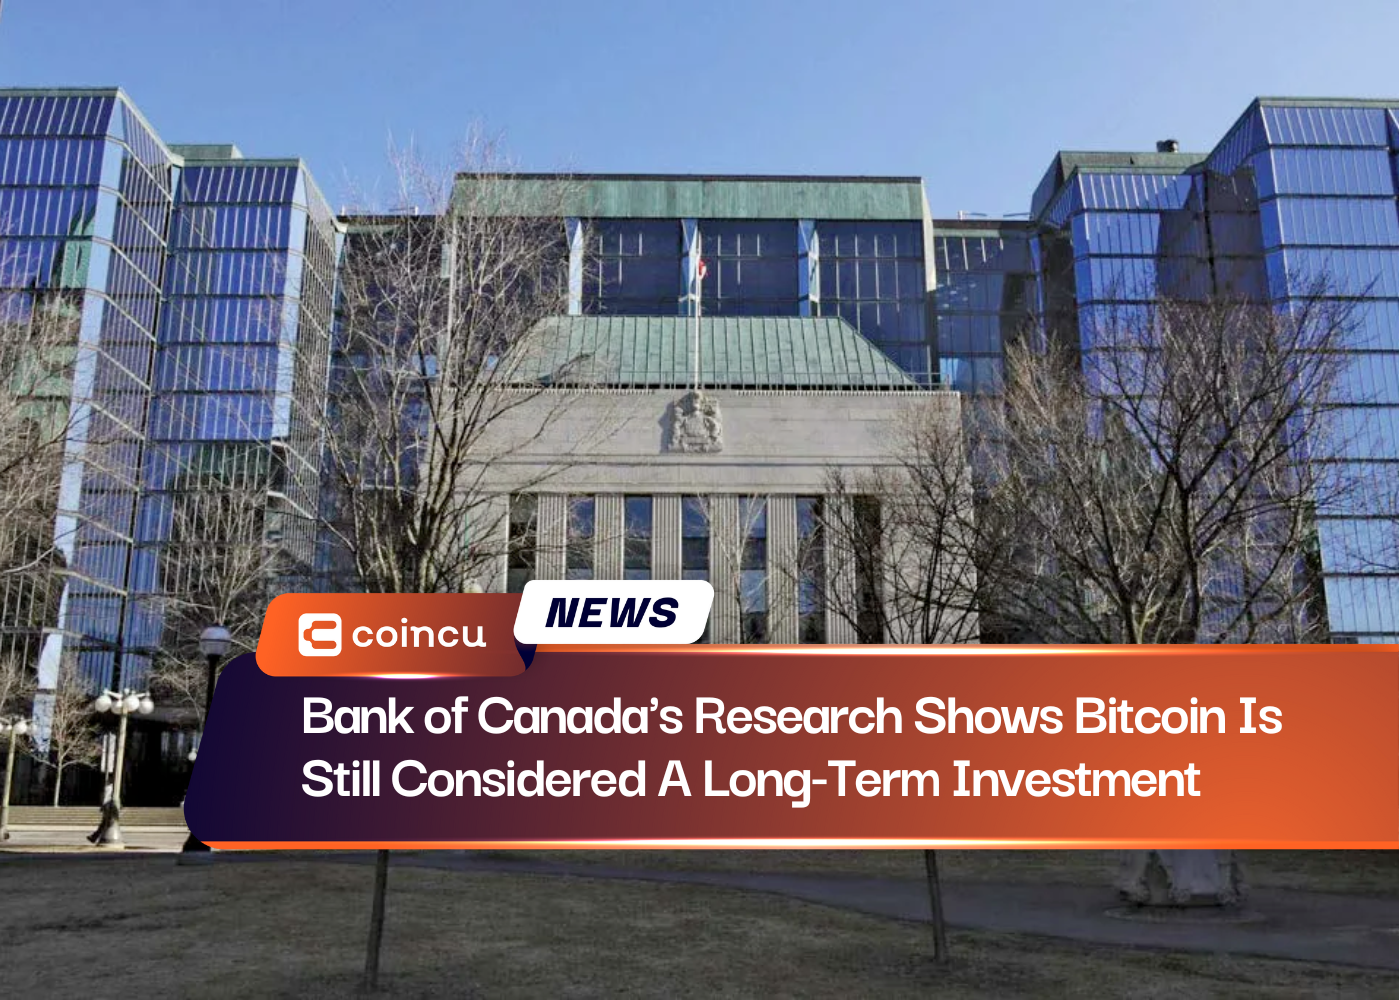 Bank of Canada's Research Shows Bitcoin Is Still Considered A Long-Term Investment